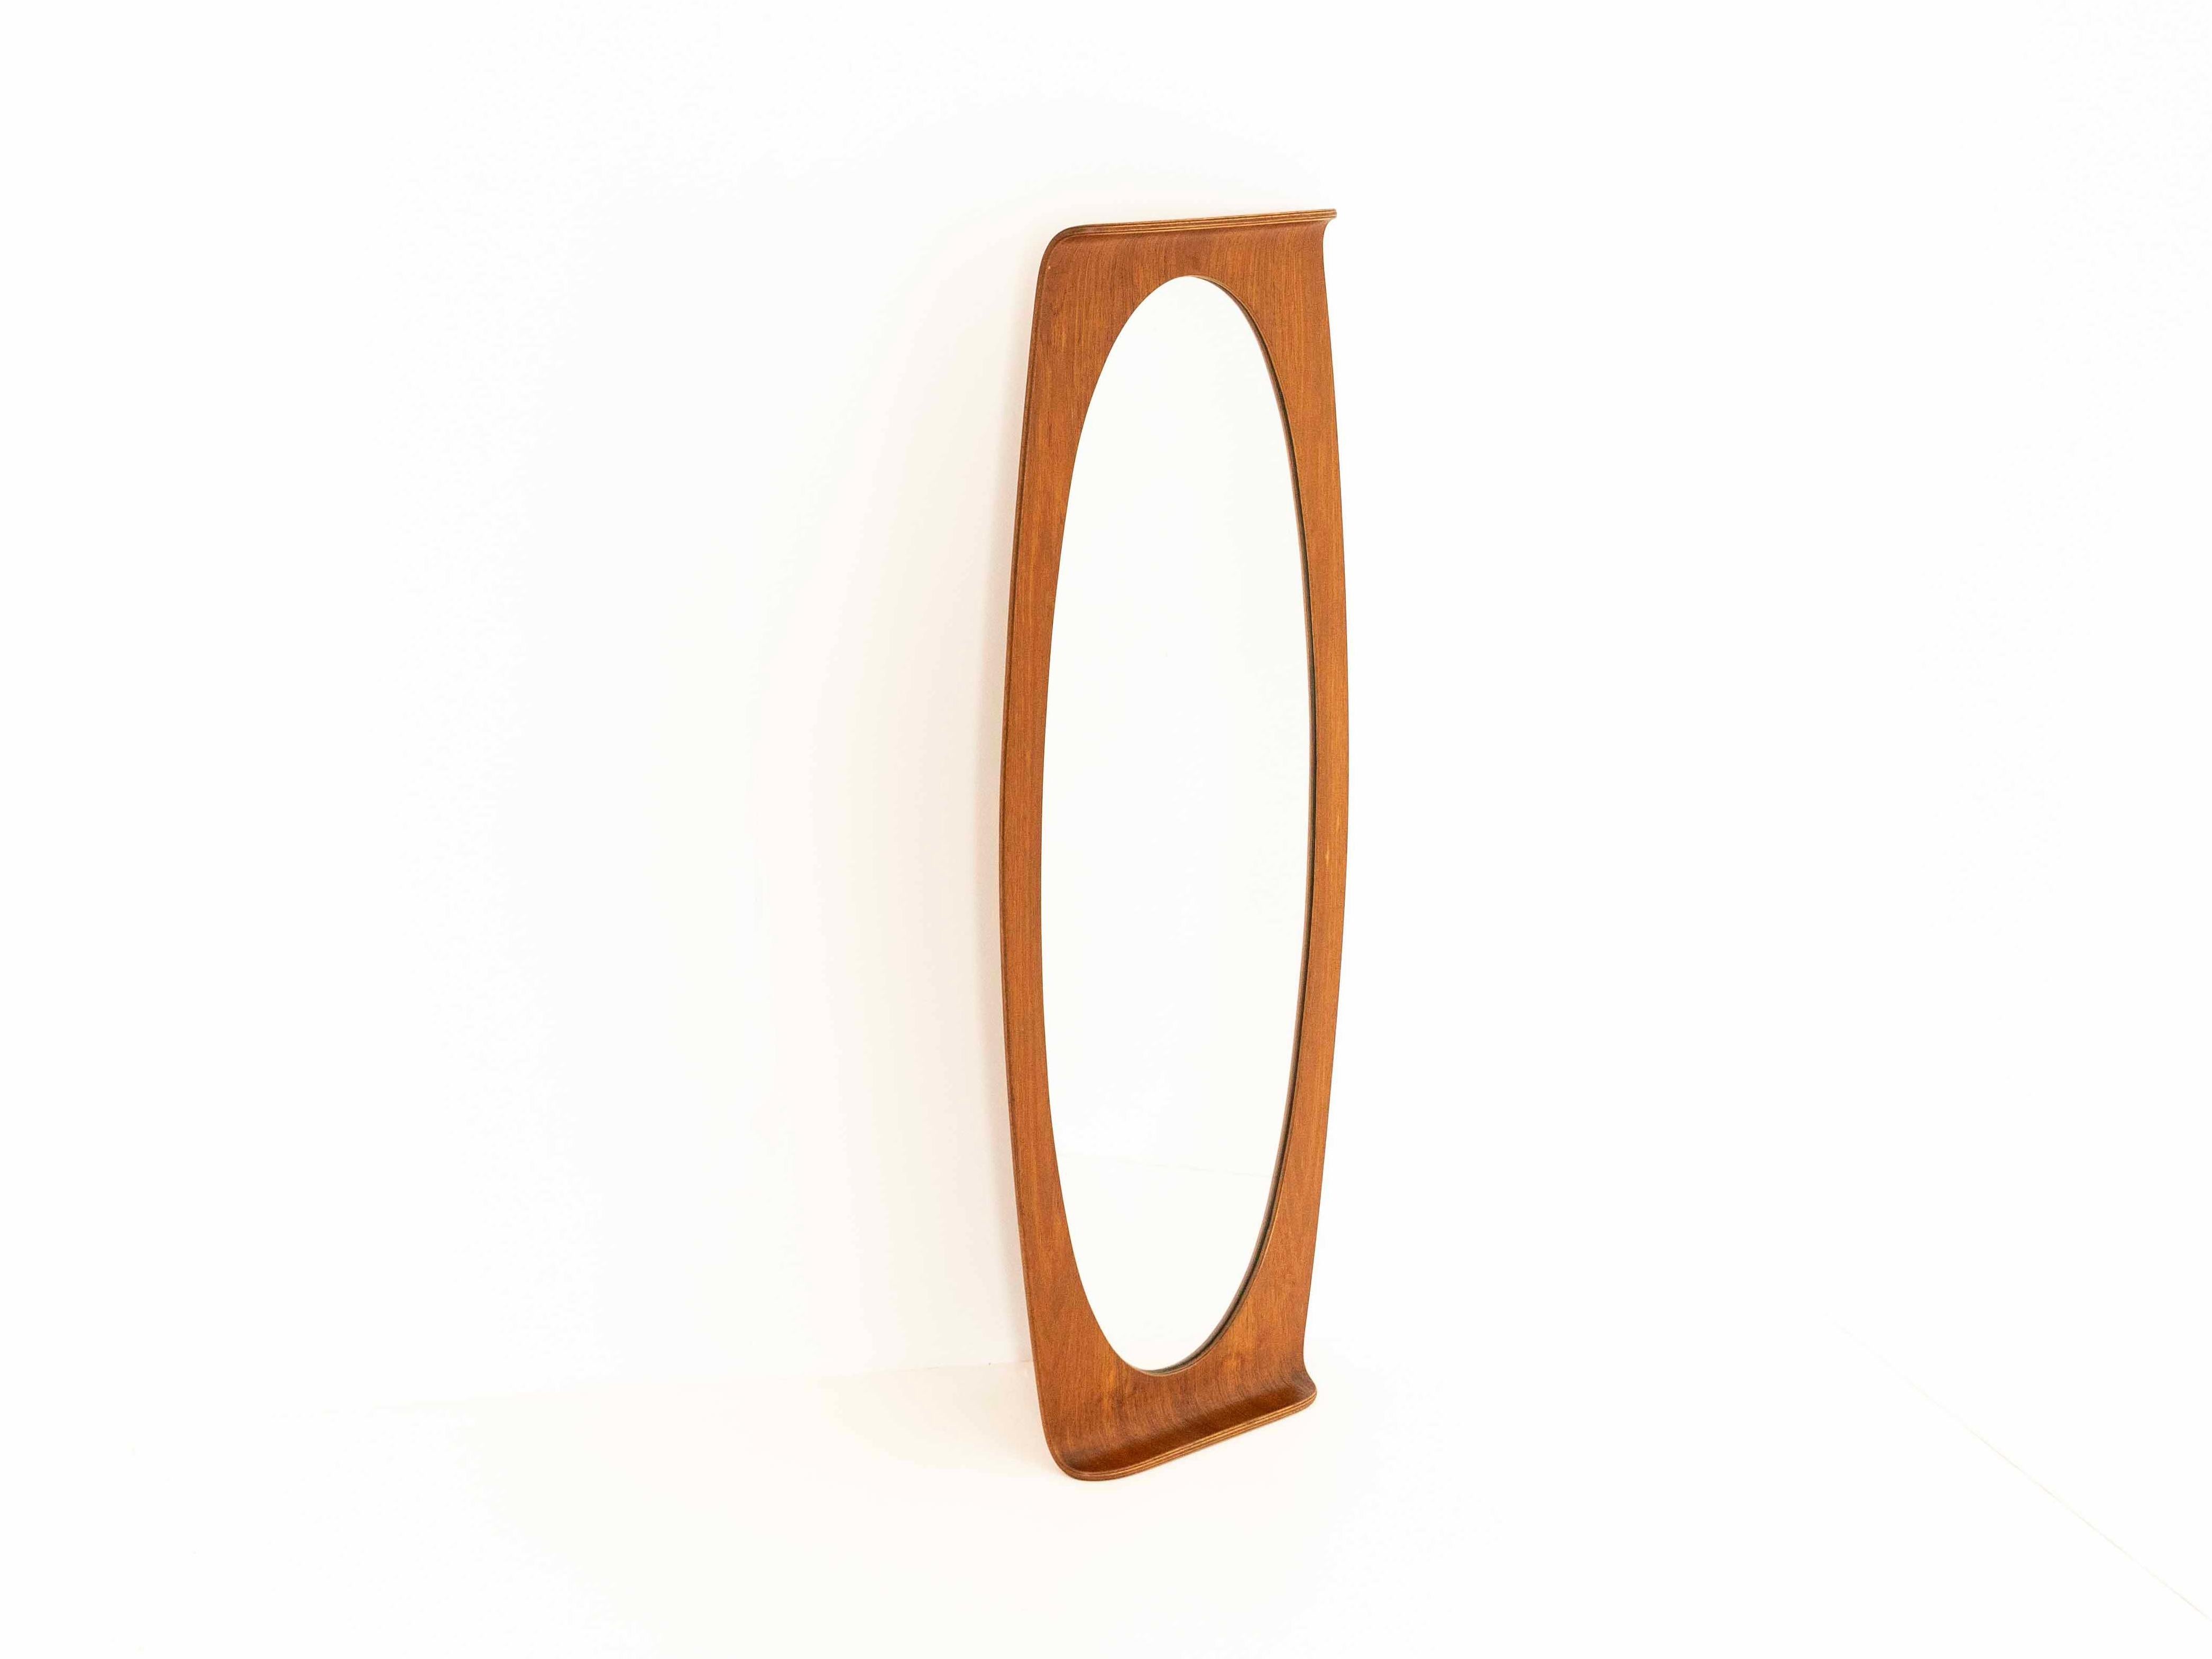 Beautiful large Italian Oval curved Plywood (teak) mirror by Campo & Graffi for home - manufactured in the 60's. It has a small curve at the top and bottom of the mirror. The mirror is in good condition with normal wear and tear due to its age. With